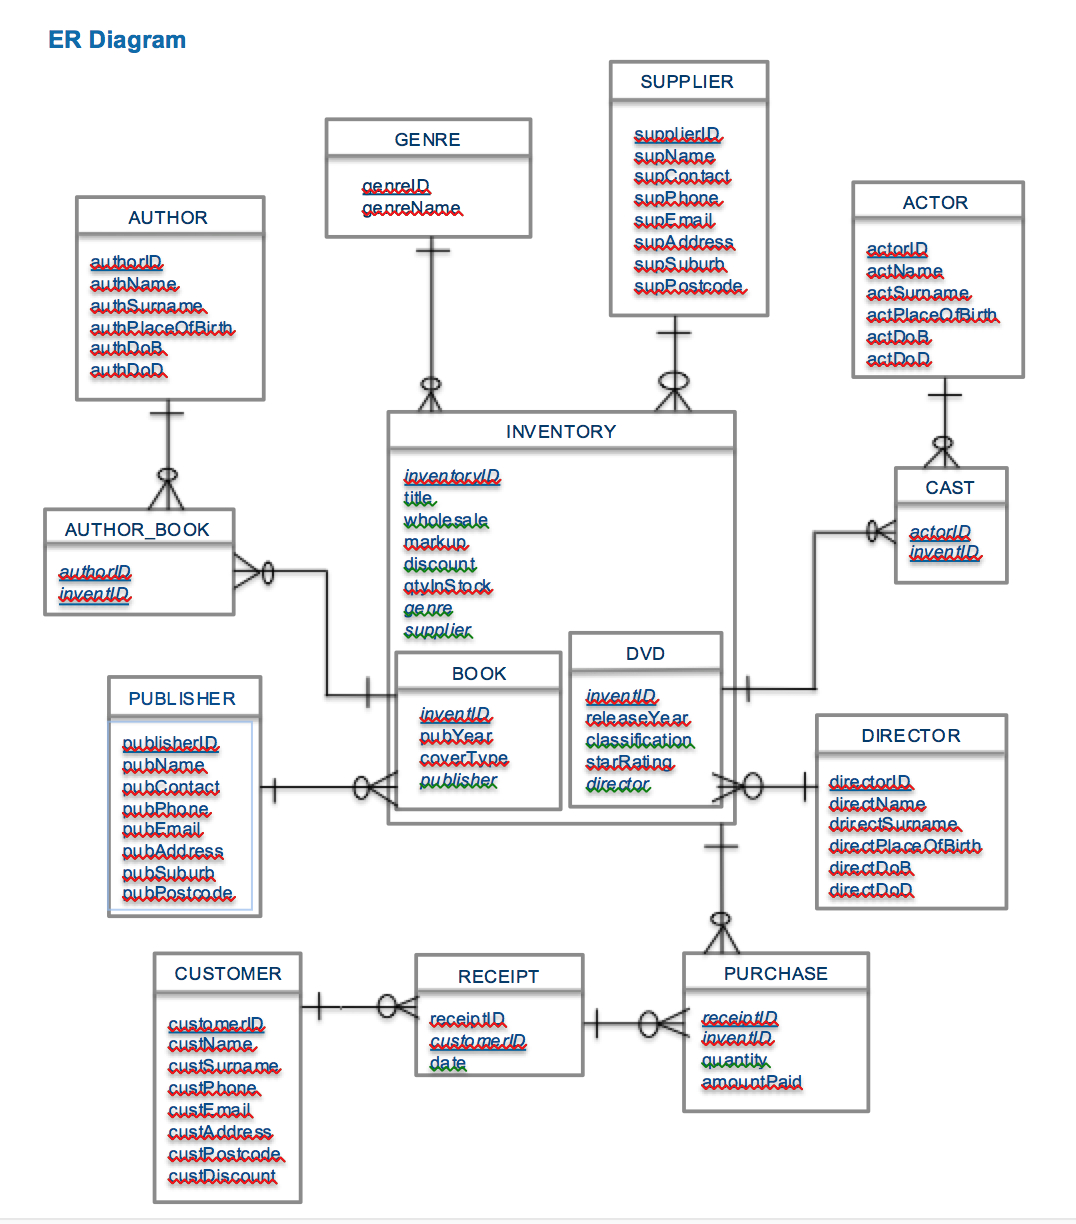 Database - How Many Tables Will The Relational Schema Have with regard to Er Diagram And Relational Schema